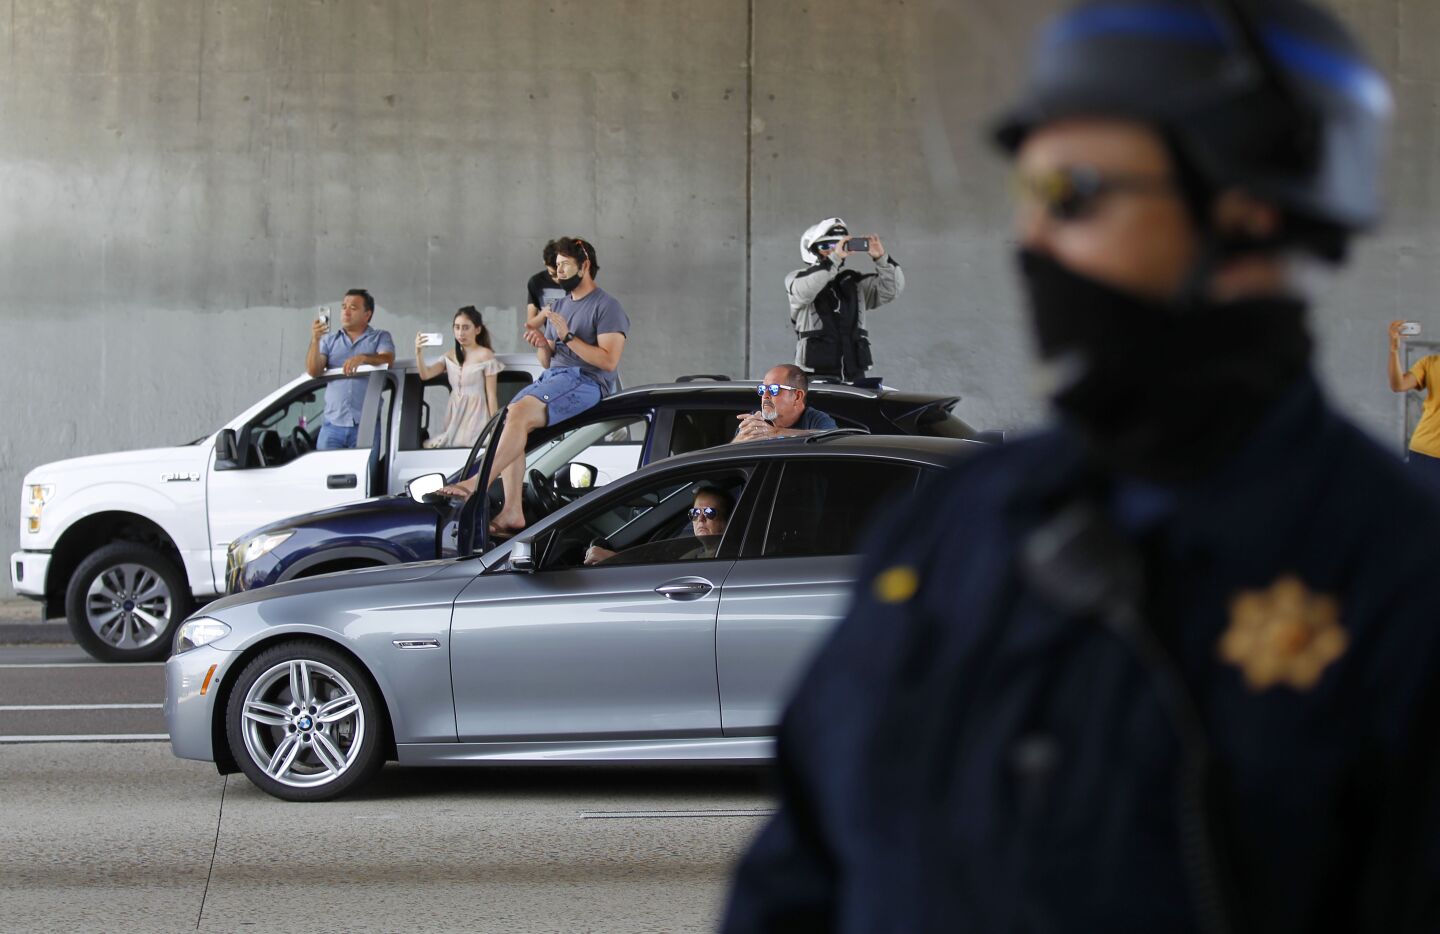 Pedestrians blocked on the freeway watch a group protesting the death of George Floyd march on I-5 in downtown San Diego on May 31, 2020.